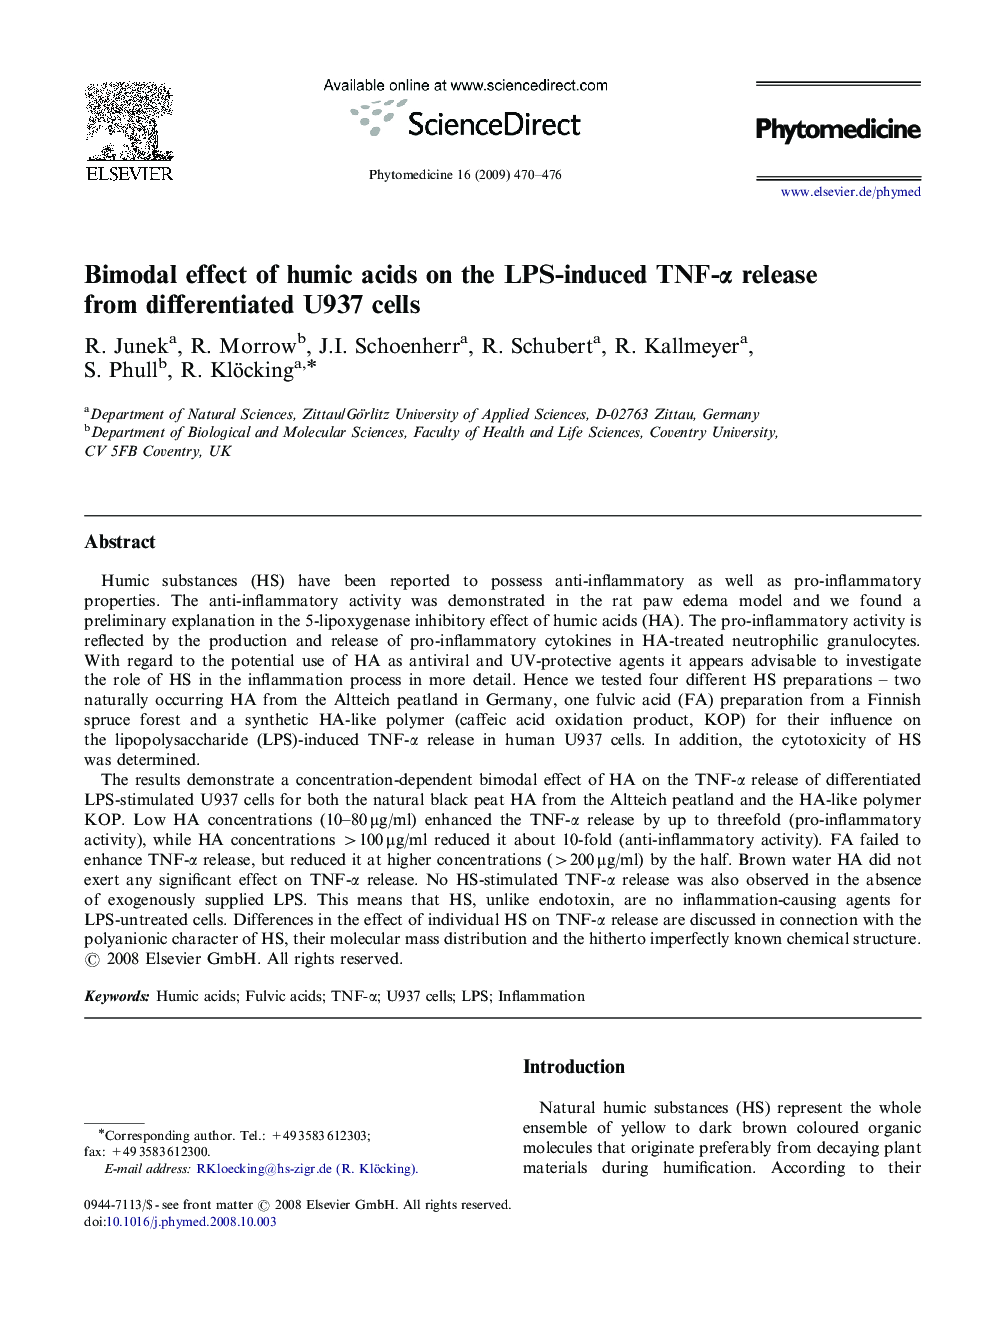 Bimodal effect of humic acids on the LPS-induced TNF-α release from differentiated U937 cells